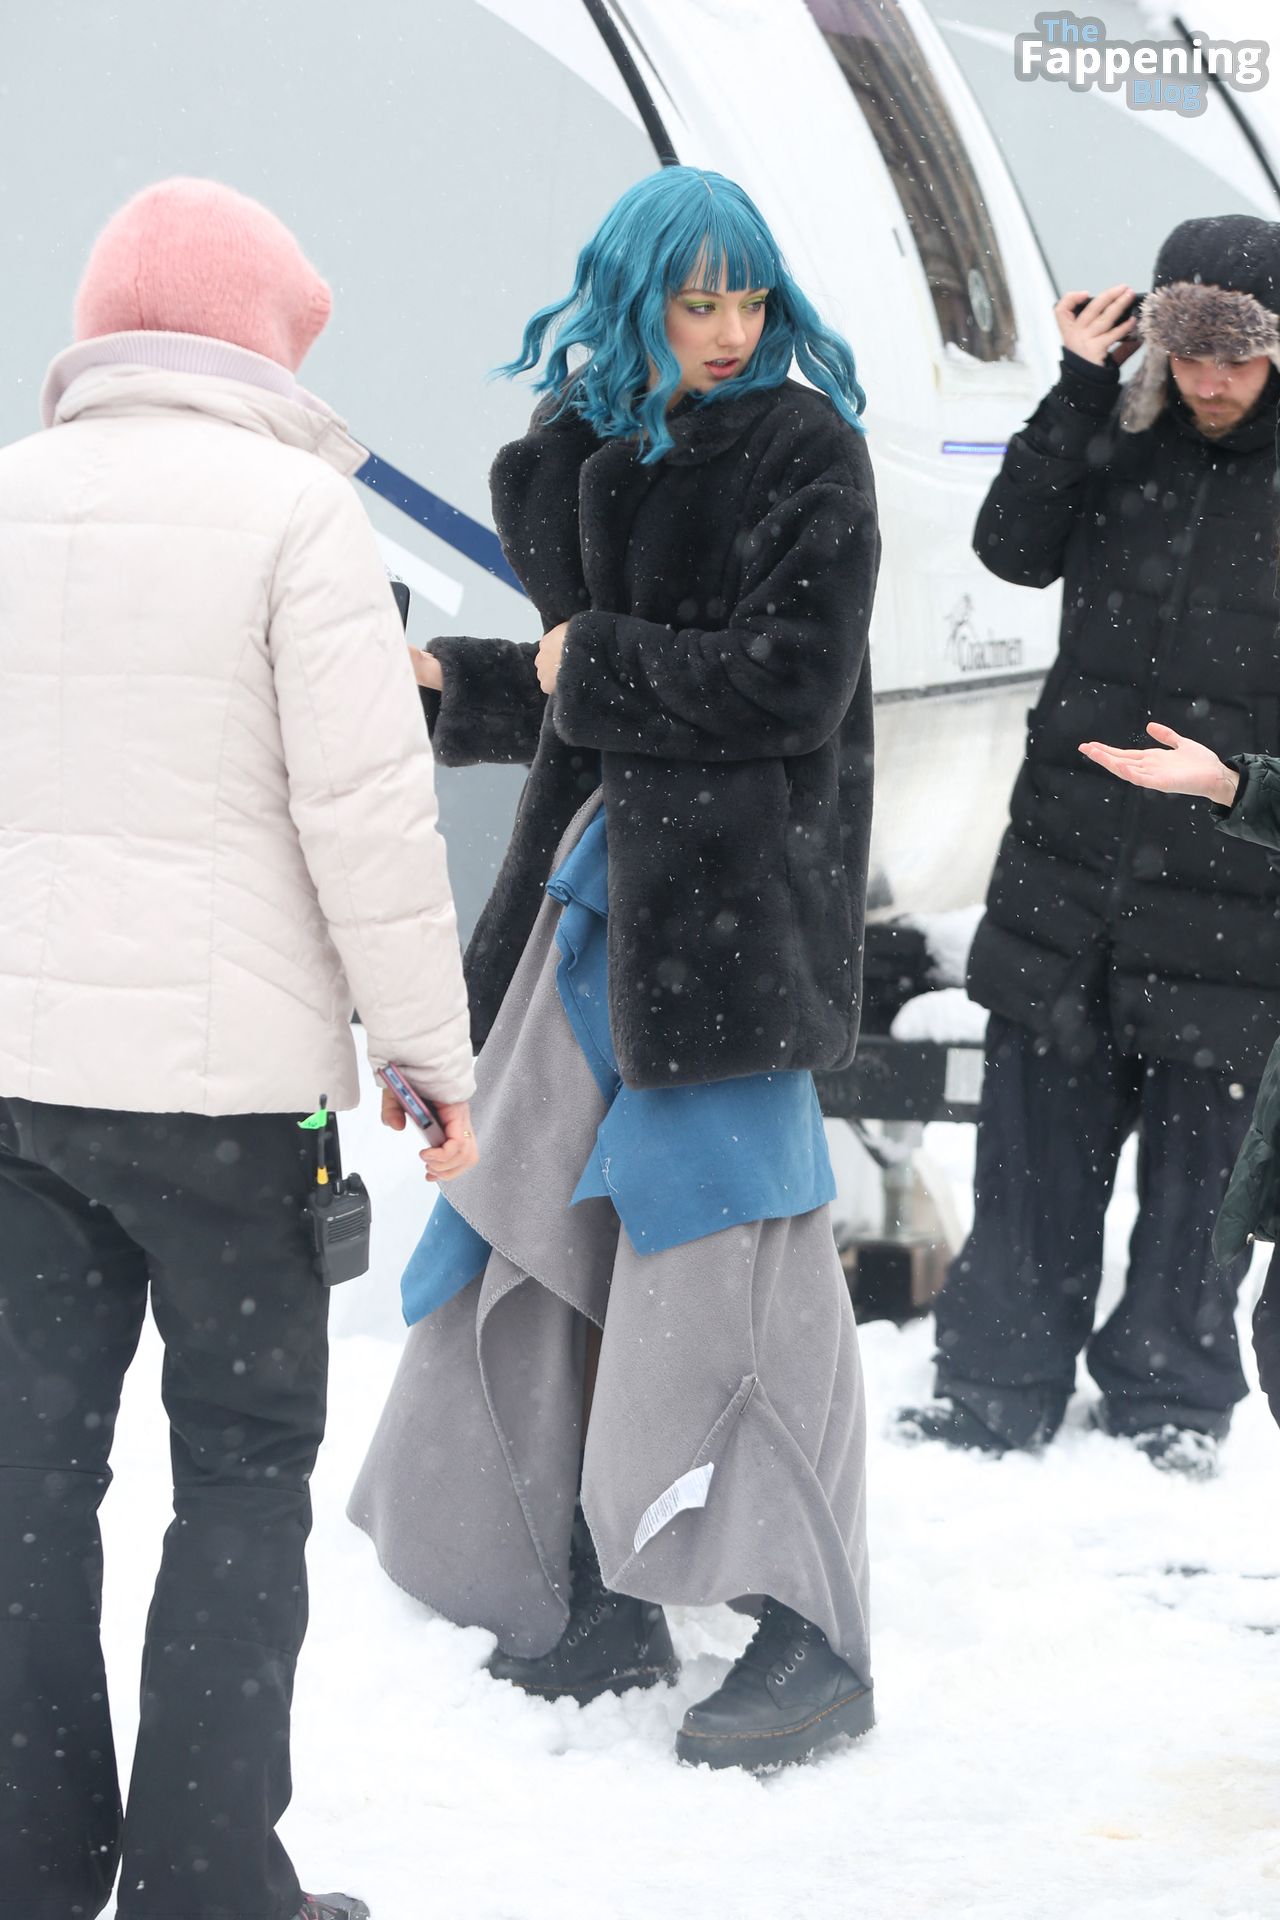 Lilly Krug is Seen at the Base Camp of the “April X” Movie Set (13 Photos)